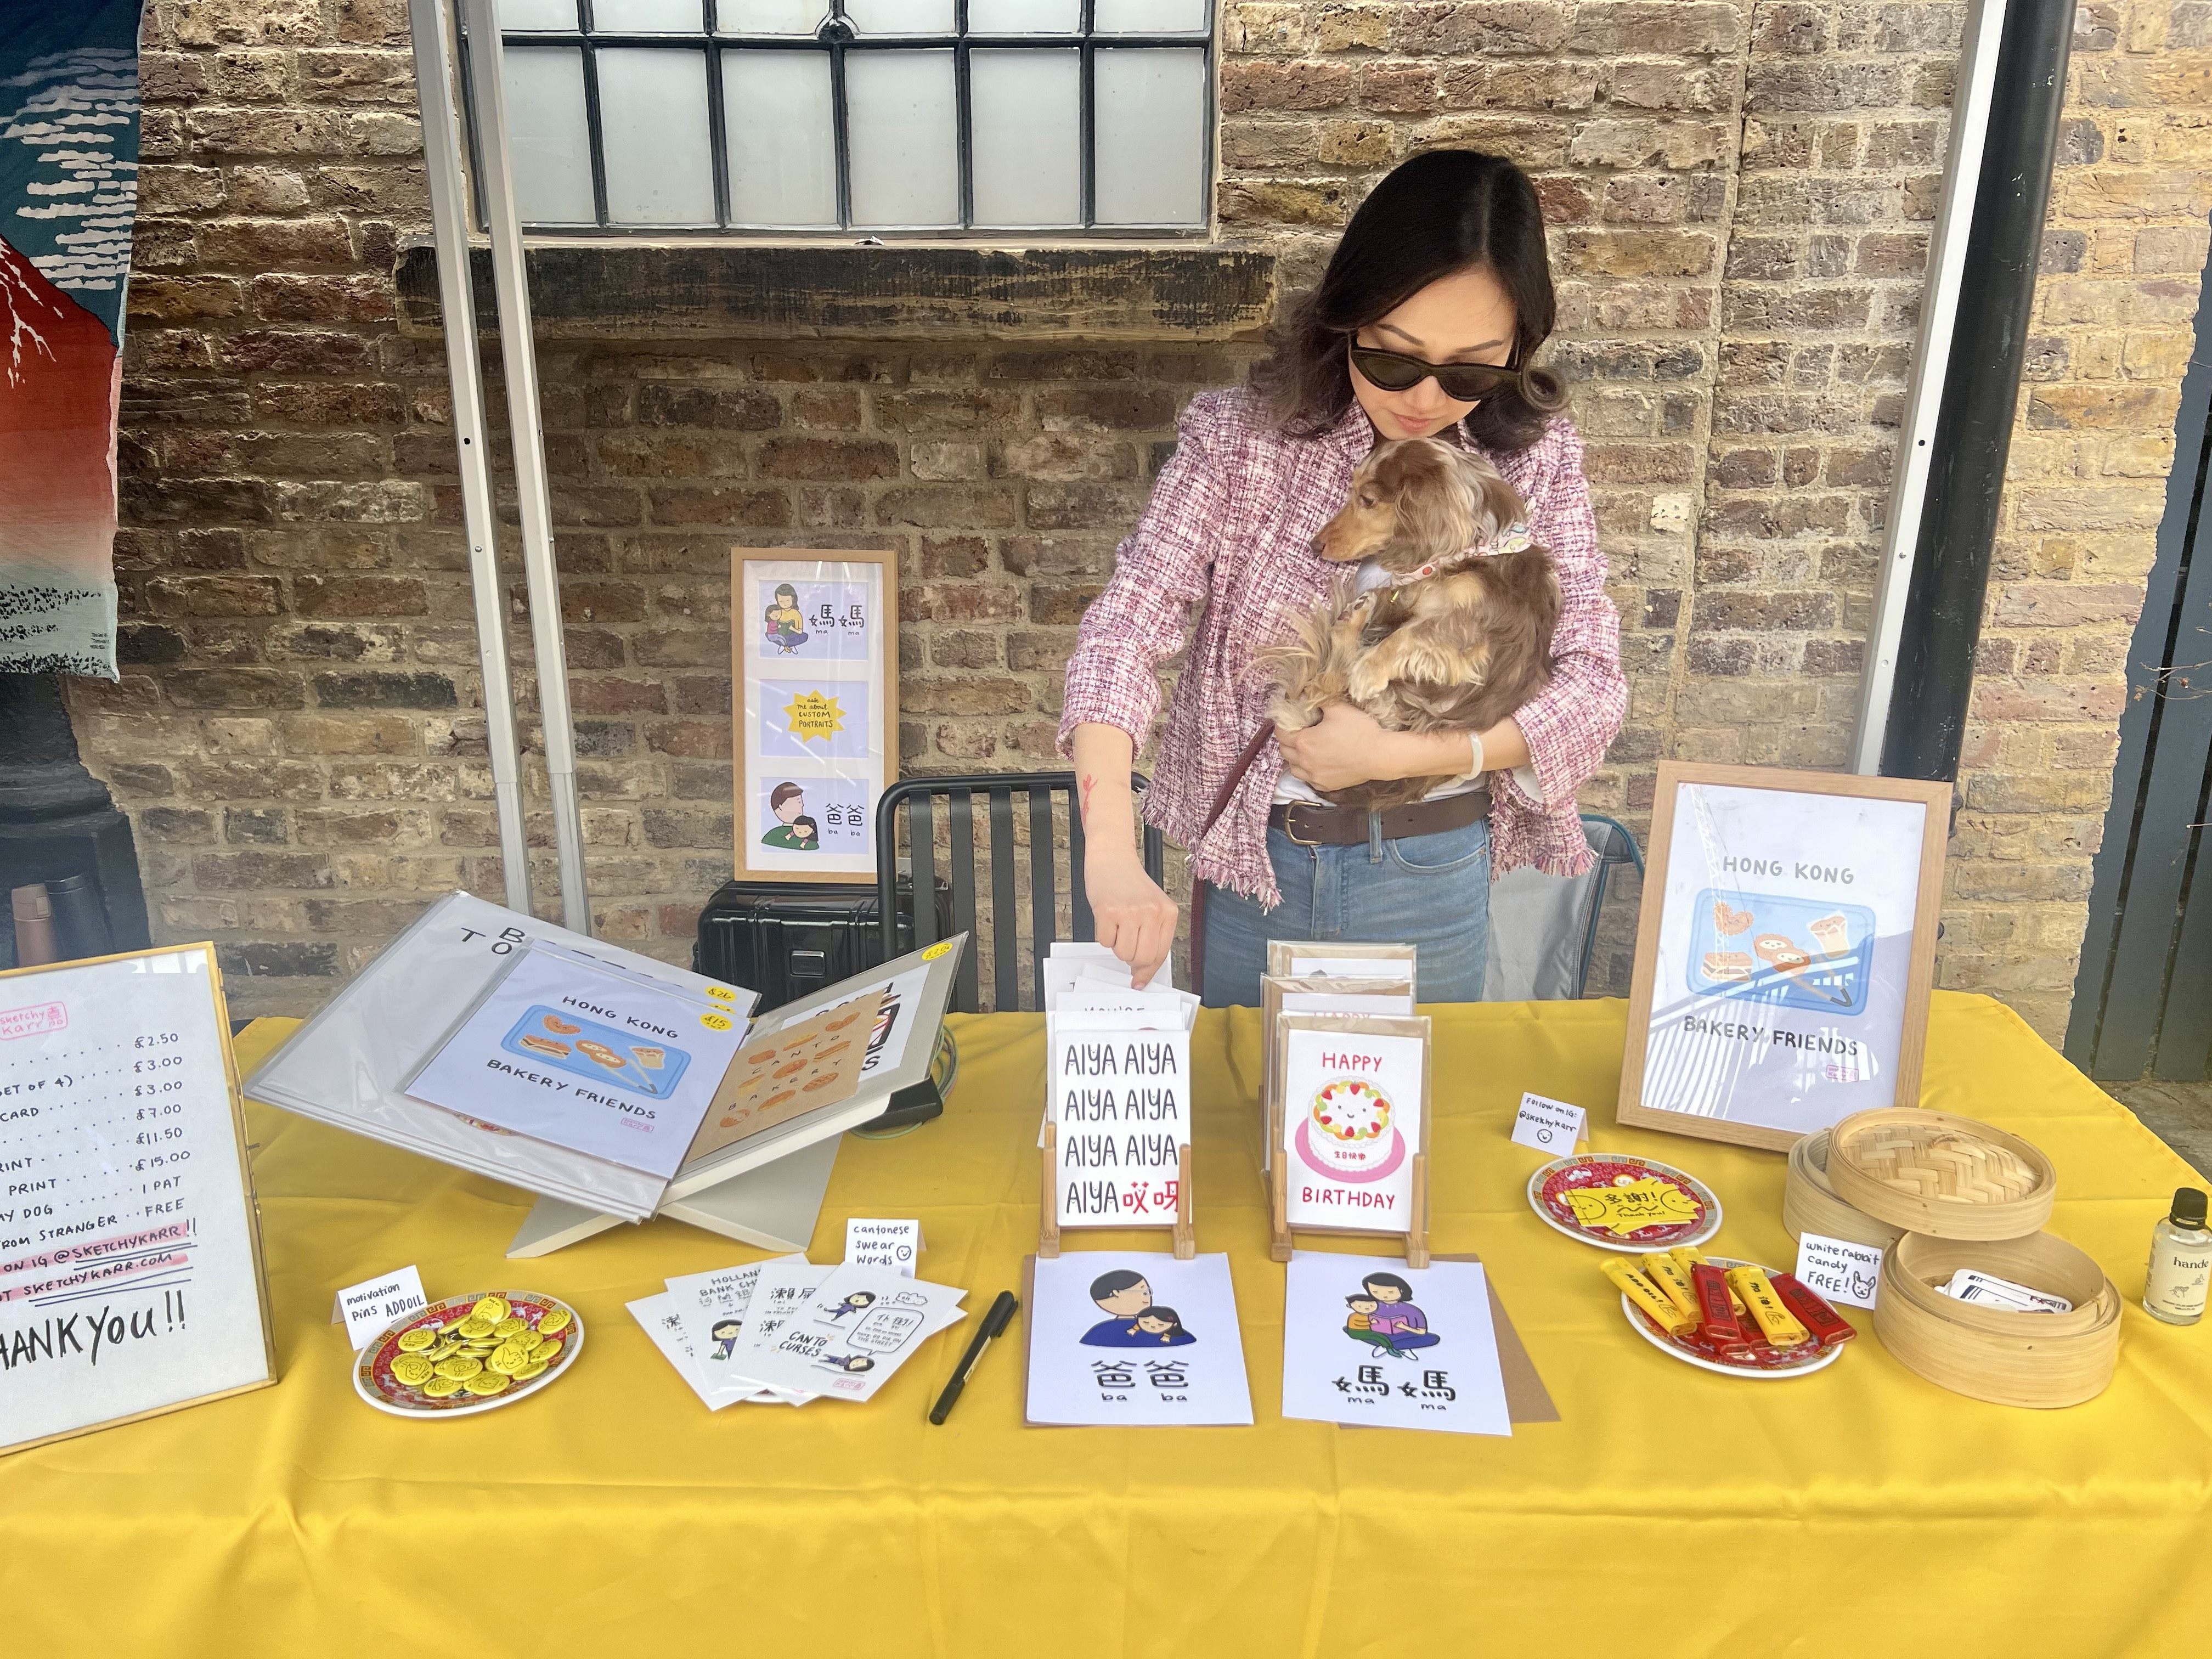 Kar, who moved from Hong Kong to Britain nine years ago, occasionally takes part in London’s art markets to sell her work. Photo: Handout